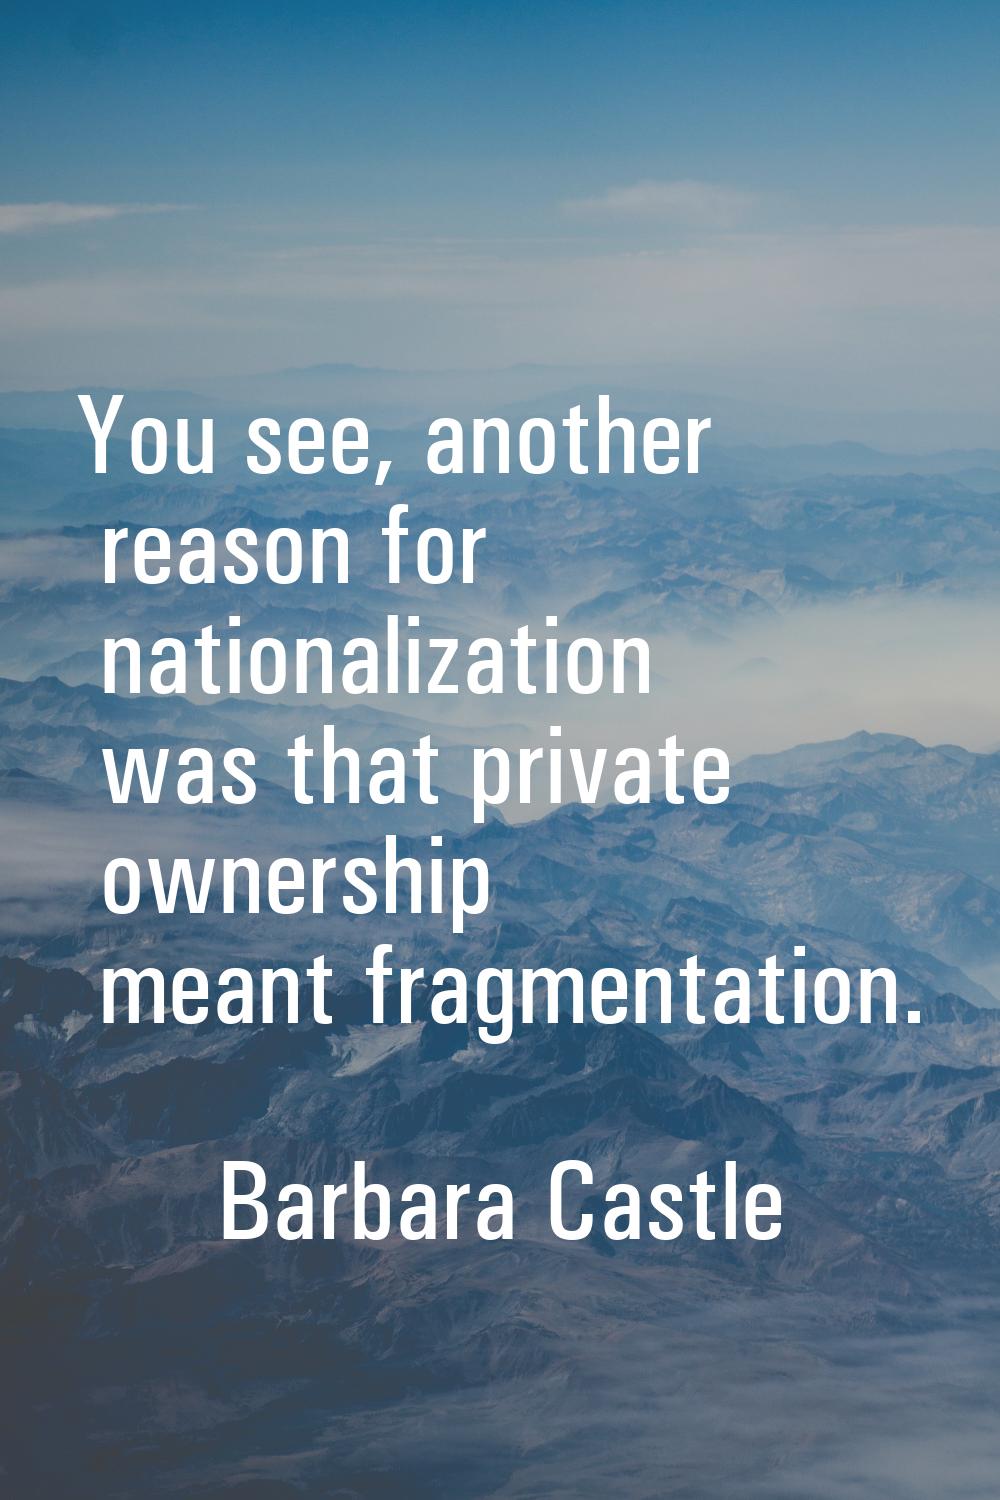 You see, another reason for nationalization was that private ownership meant fragmentation.